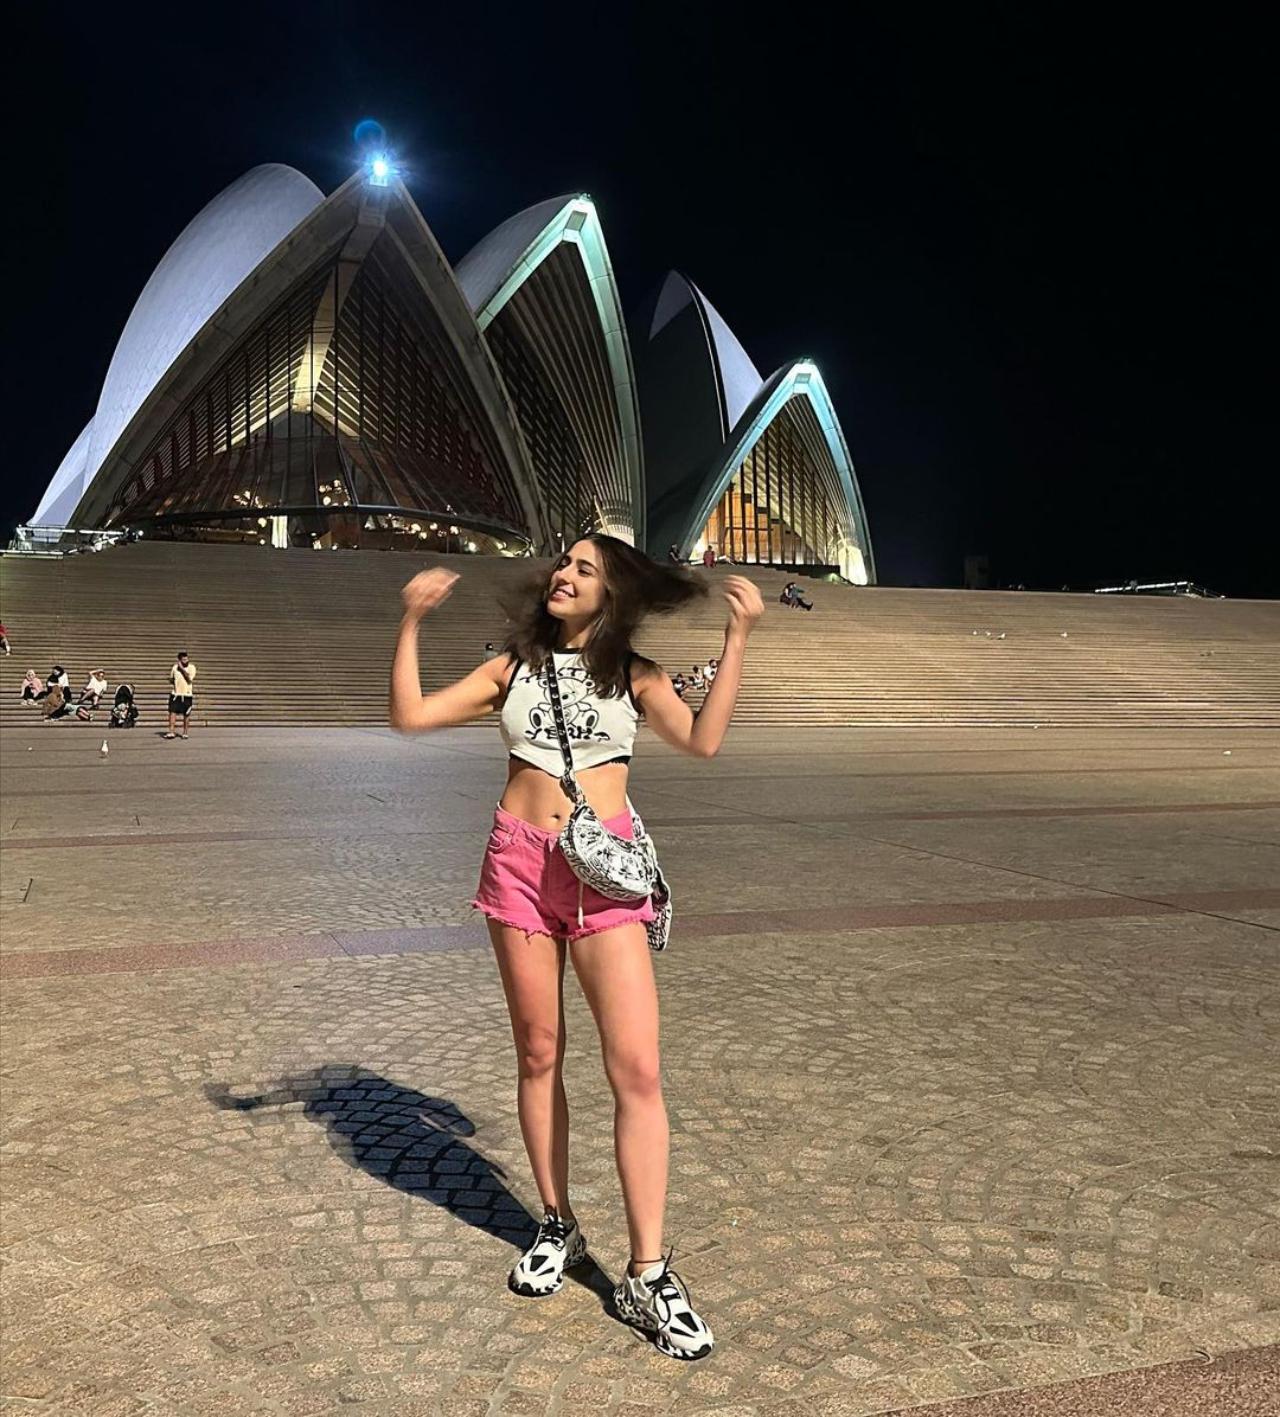 Sara posted pictures of herself posing in different locations of Sydney. In the above picture, the actress is seen posing in front of the famous Sydney Opera House